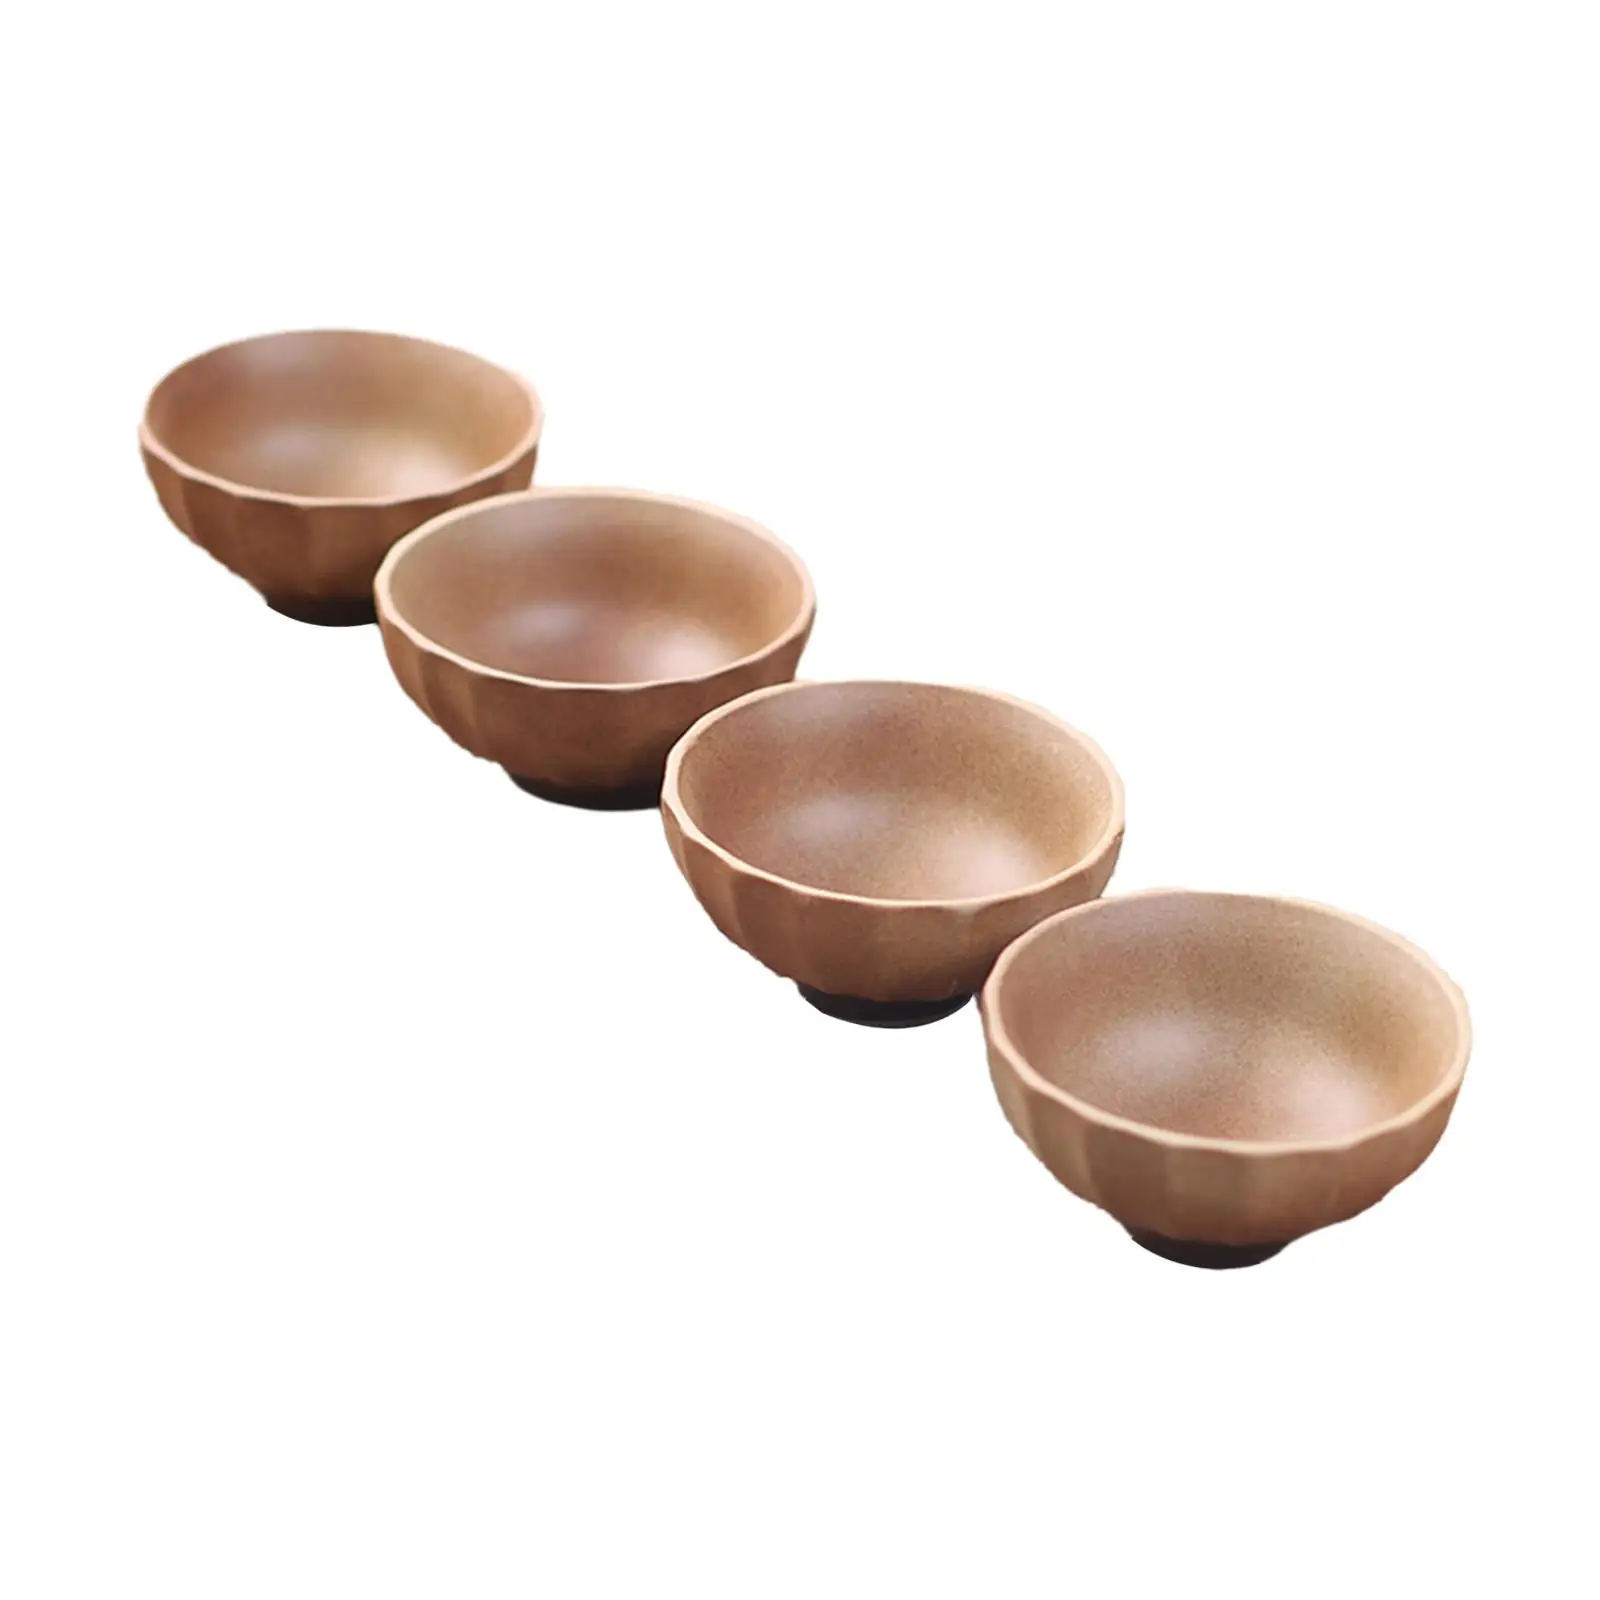 4 Pieces Chinese Ceramic Tea Cups Petal Shape Chinese Tea Cups for Hotel Tea Ceremony Party Office Coffee Shop Green Tea